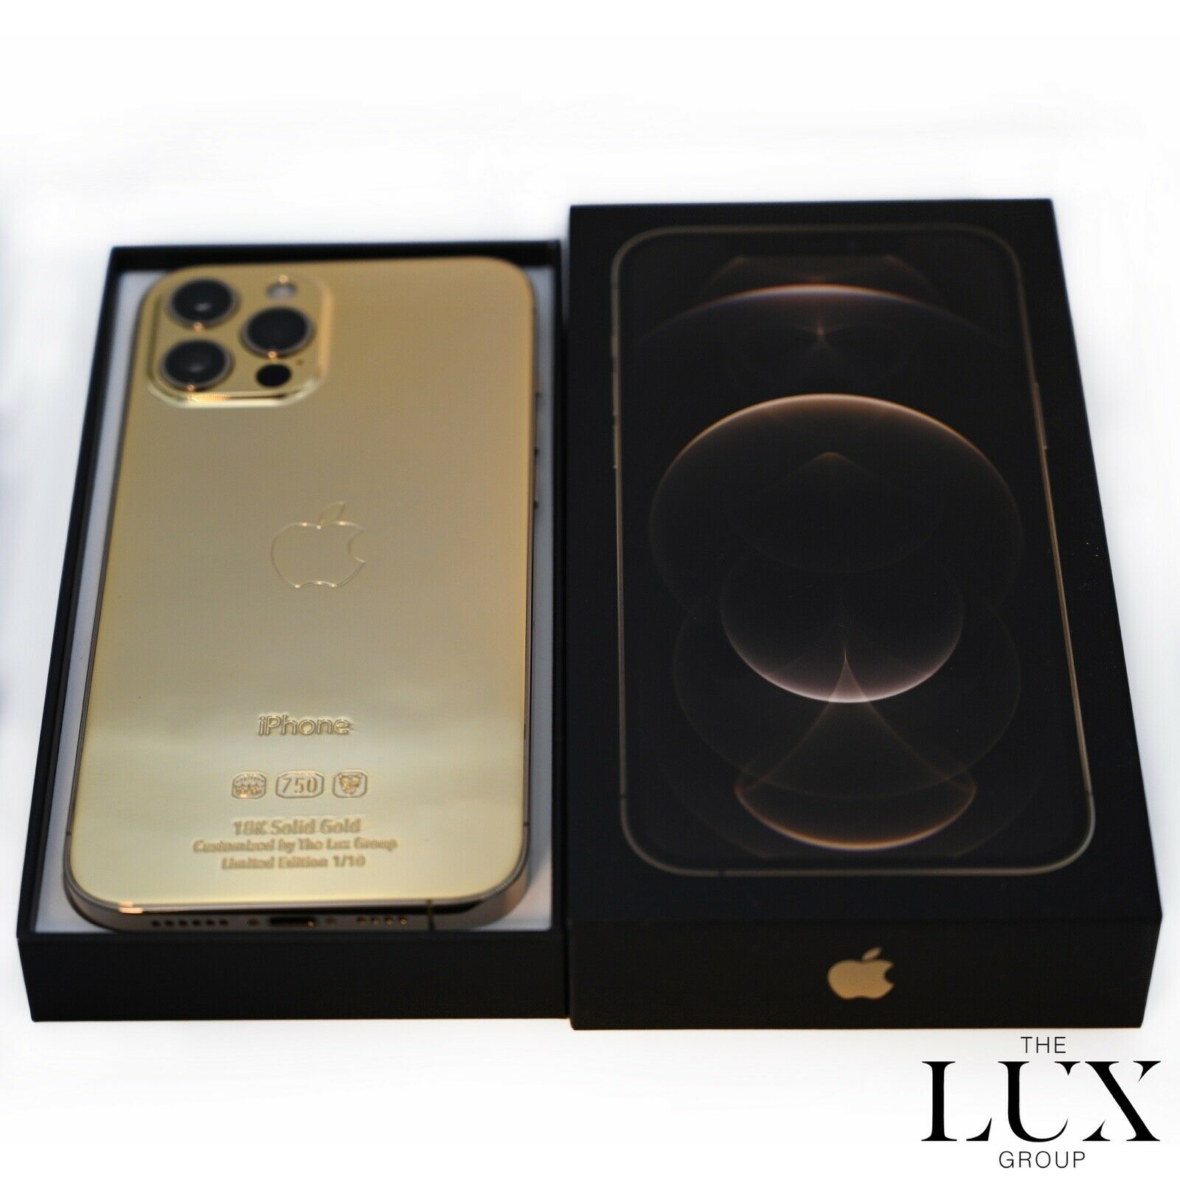 The iPhone 12 Pro Max is already a flagship device with its advanced features and top-notch performance. But for those who seek the most expensive Apple products, the iPhone 12 Pro Max Solid Gold Edition by Caviar is the ultimate choice. This limited-edition iPhone is encased in a solid 18-karat gold frame, handcrafted to perfection. The back panel features a sleek black crocodile leather finish, adding a touch of elegance to this opulent device. Priced at a staggering $10,000 this iPhone is a true status symbol for those who desire the pinnacle of luxury in their hand.